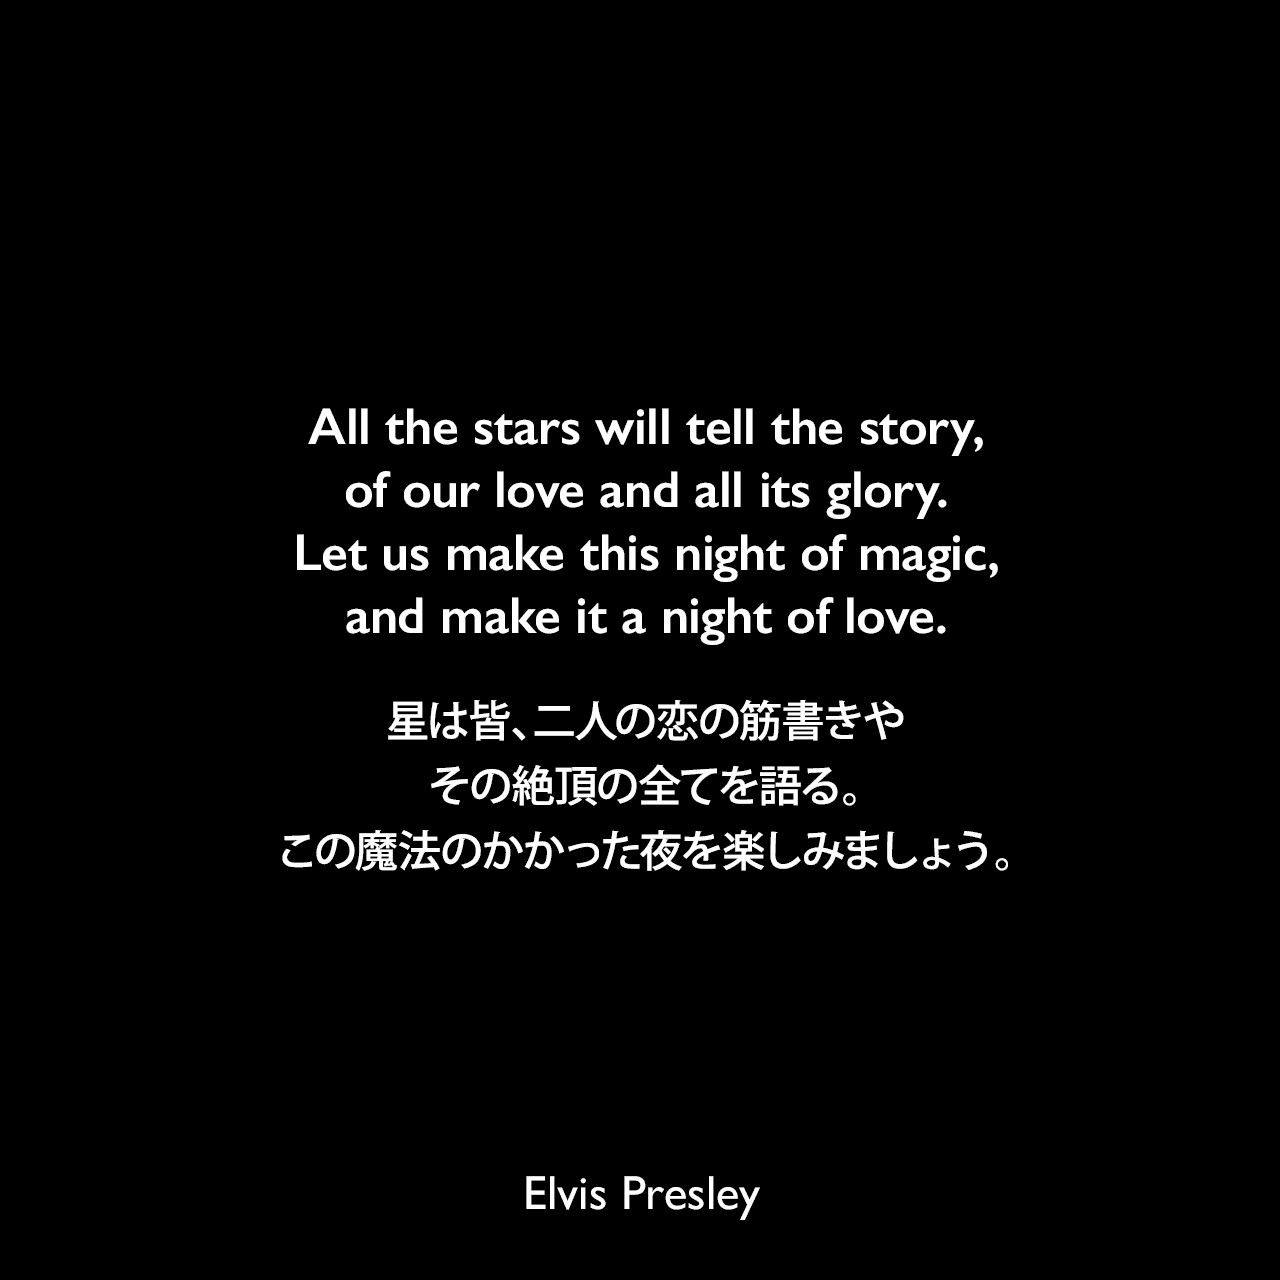 All the stars will tell the story, of our love and all its glory. Let us make this night of magic, and make it a night of love.星は皆、二人の恋の筋書きやその絶頂の全てを語る。この魔法のかかった夜を楽しみましょう。- プレスリーの曲「Surrender」よりElvis Presley